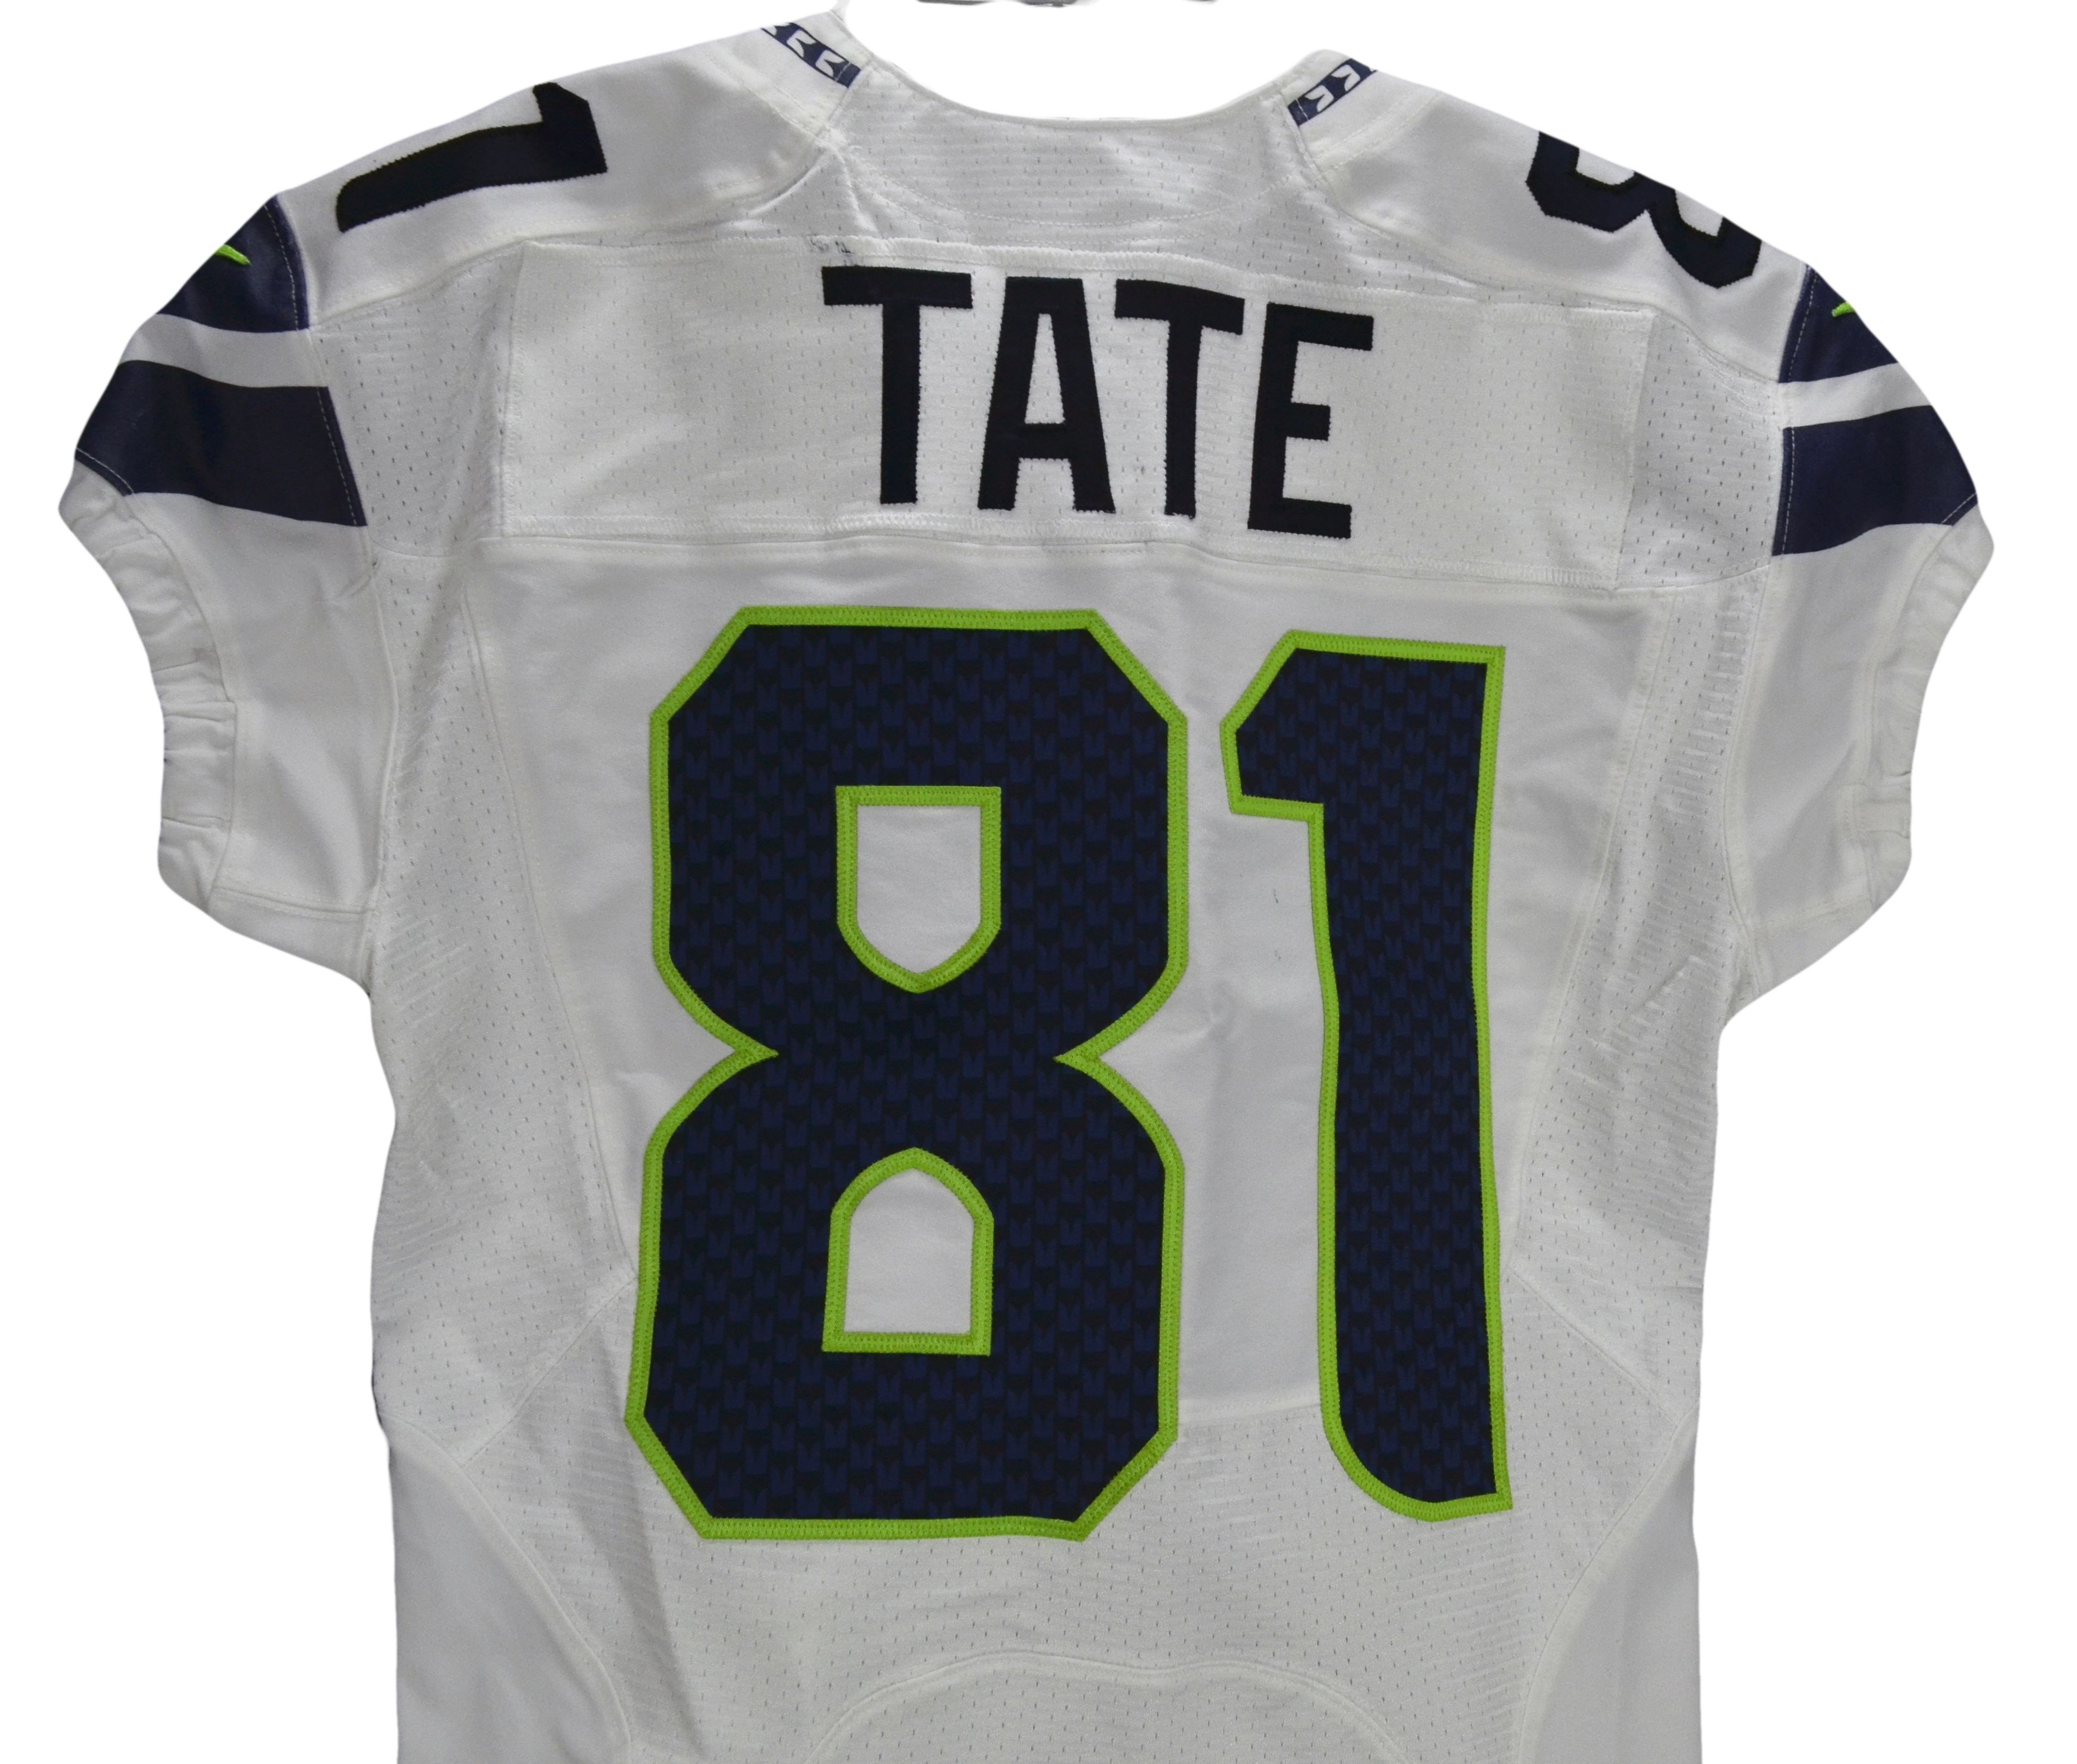 golden tate seahawks jersey youth